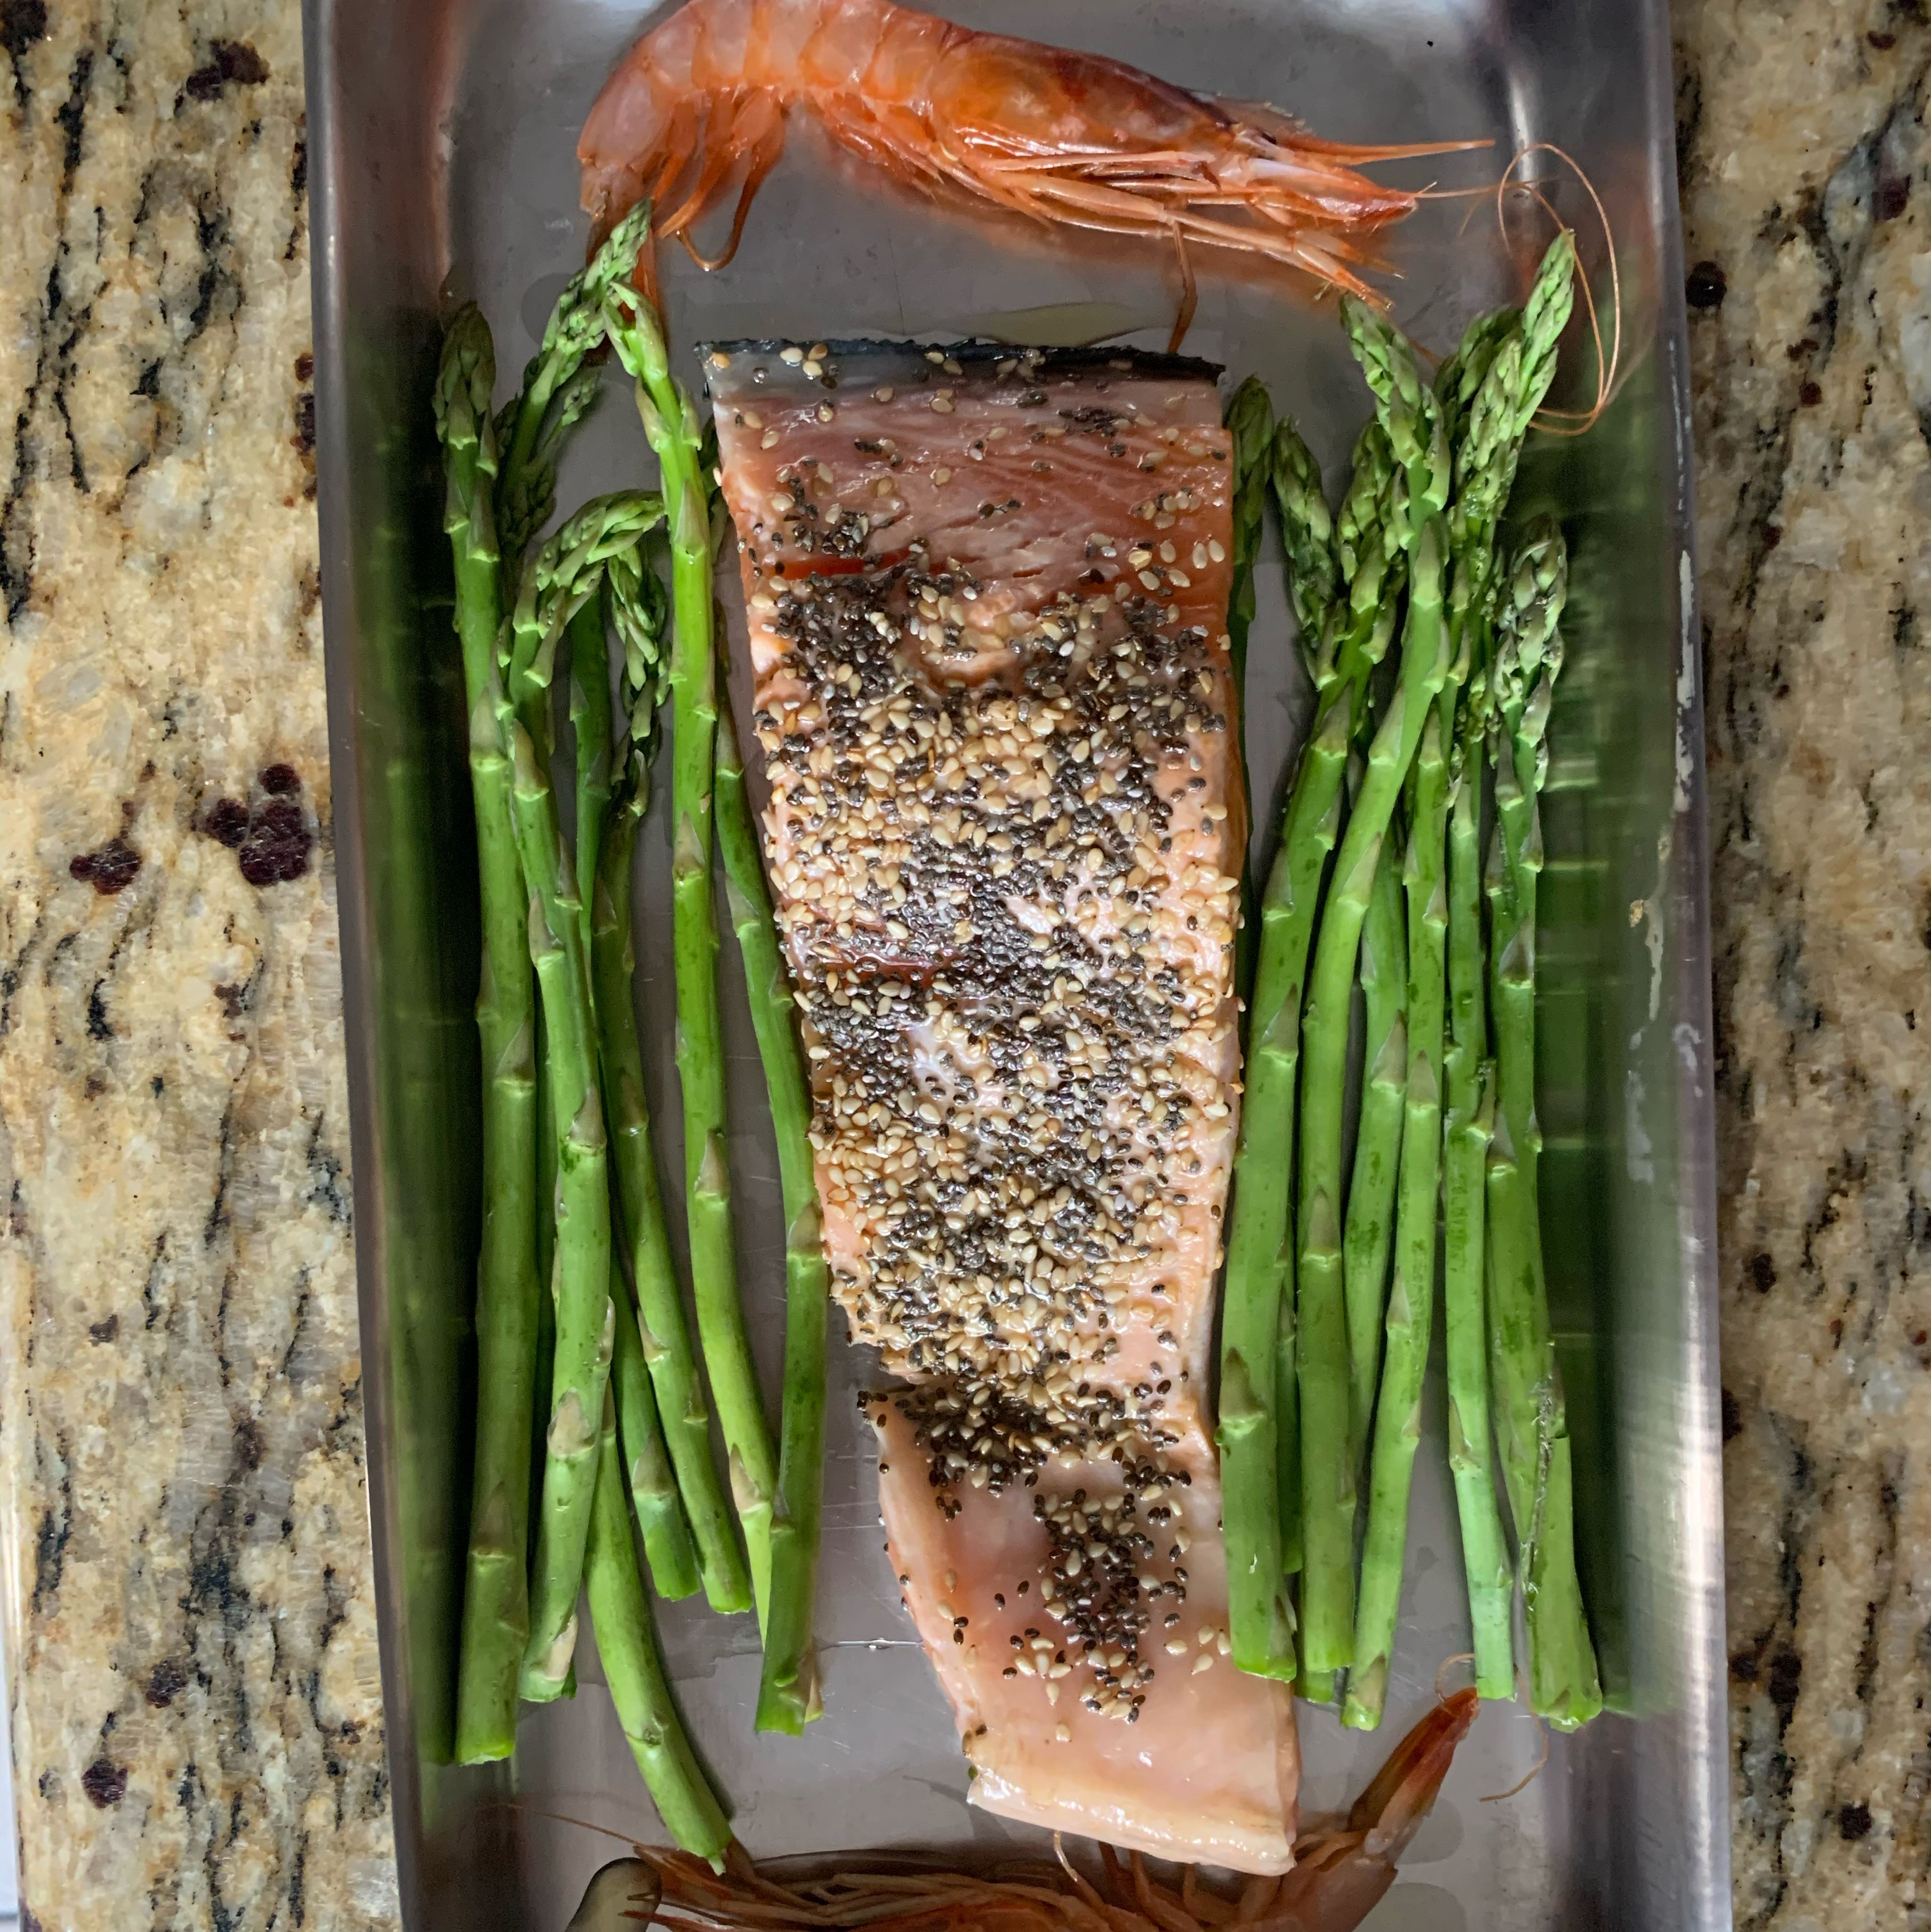 In an oven recipient place the salmon, together with the asparagus and if you’d like shrimps and let it cook in the oven for 7 minutes